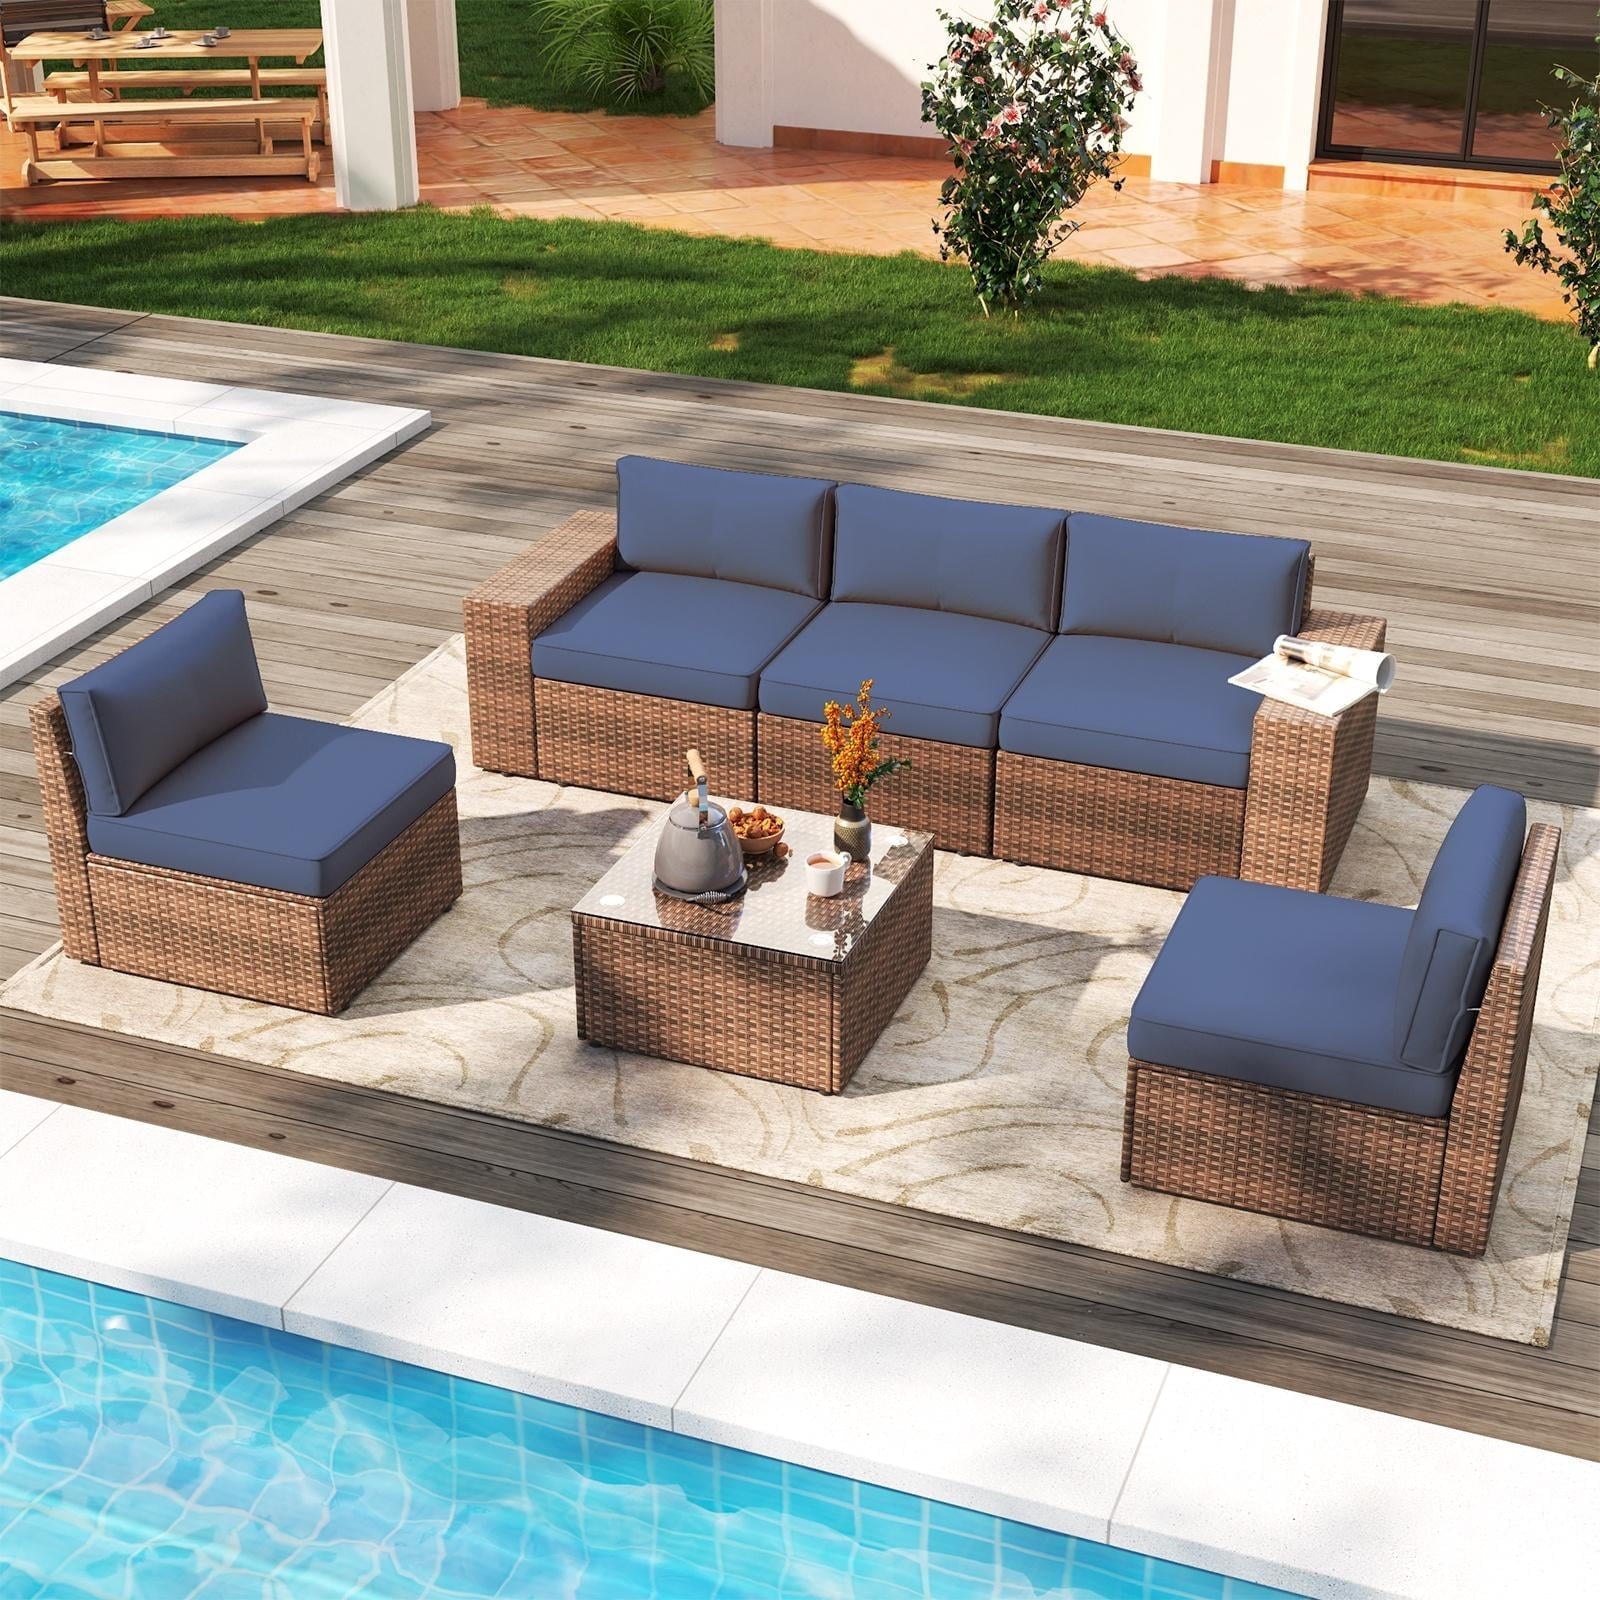 6 Pieces Patio Furniture Sets, Outdoor Sectional Rattan Sofa Set, Patio Furniture Set with Coffee Table, Blue